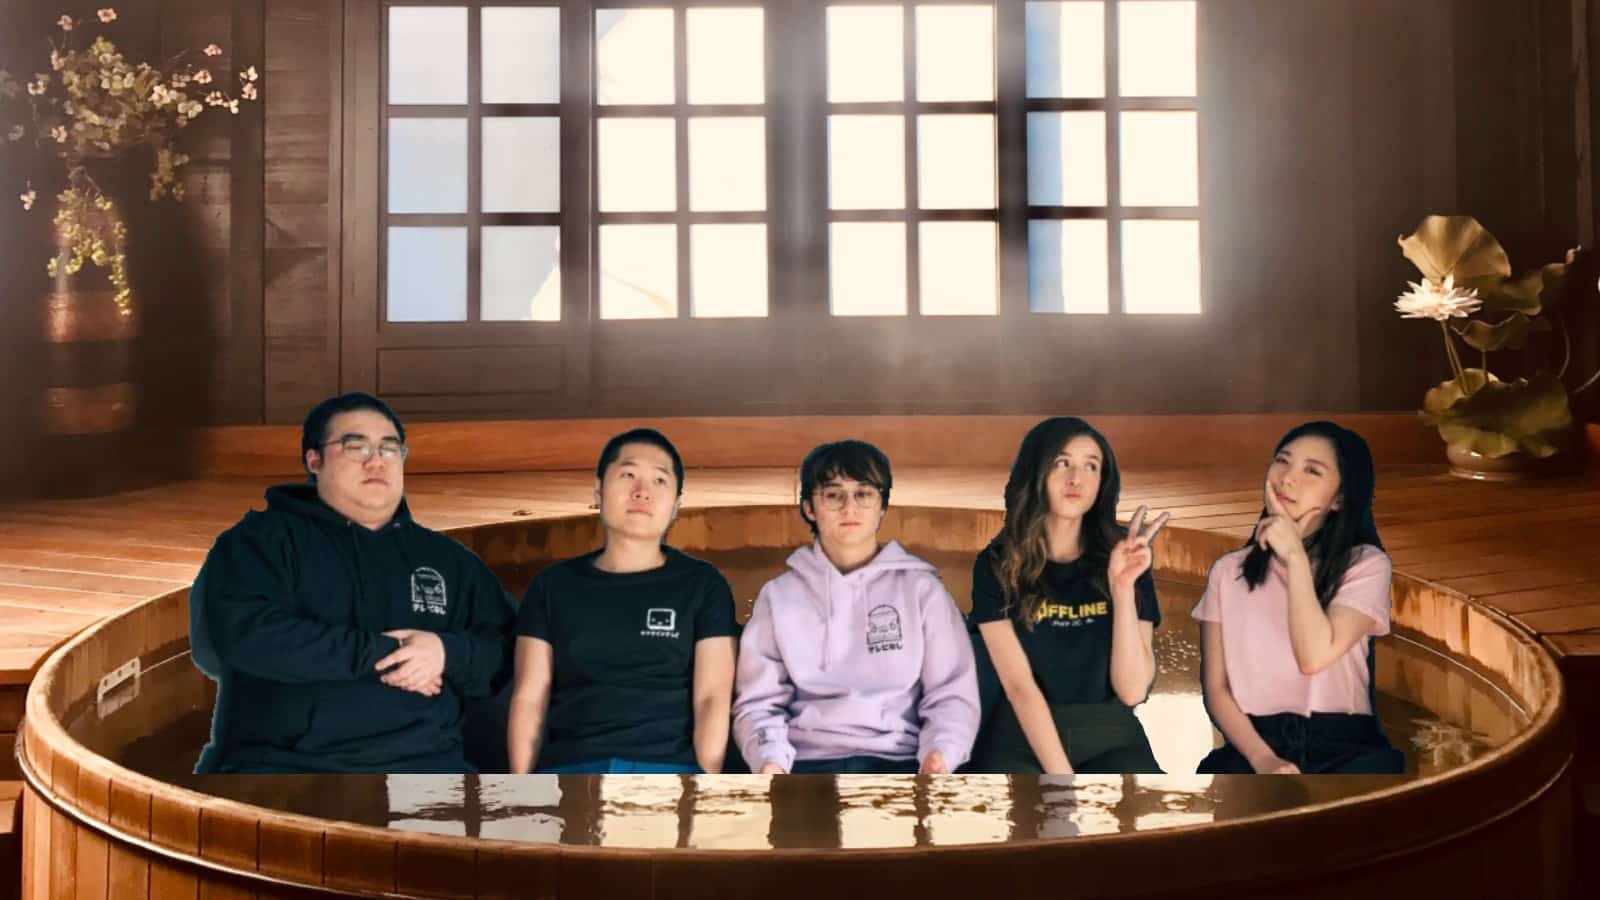 edited image of offlinetv in a hot tub